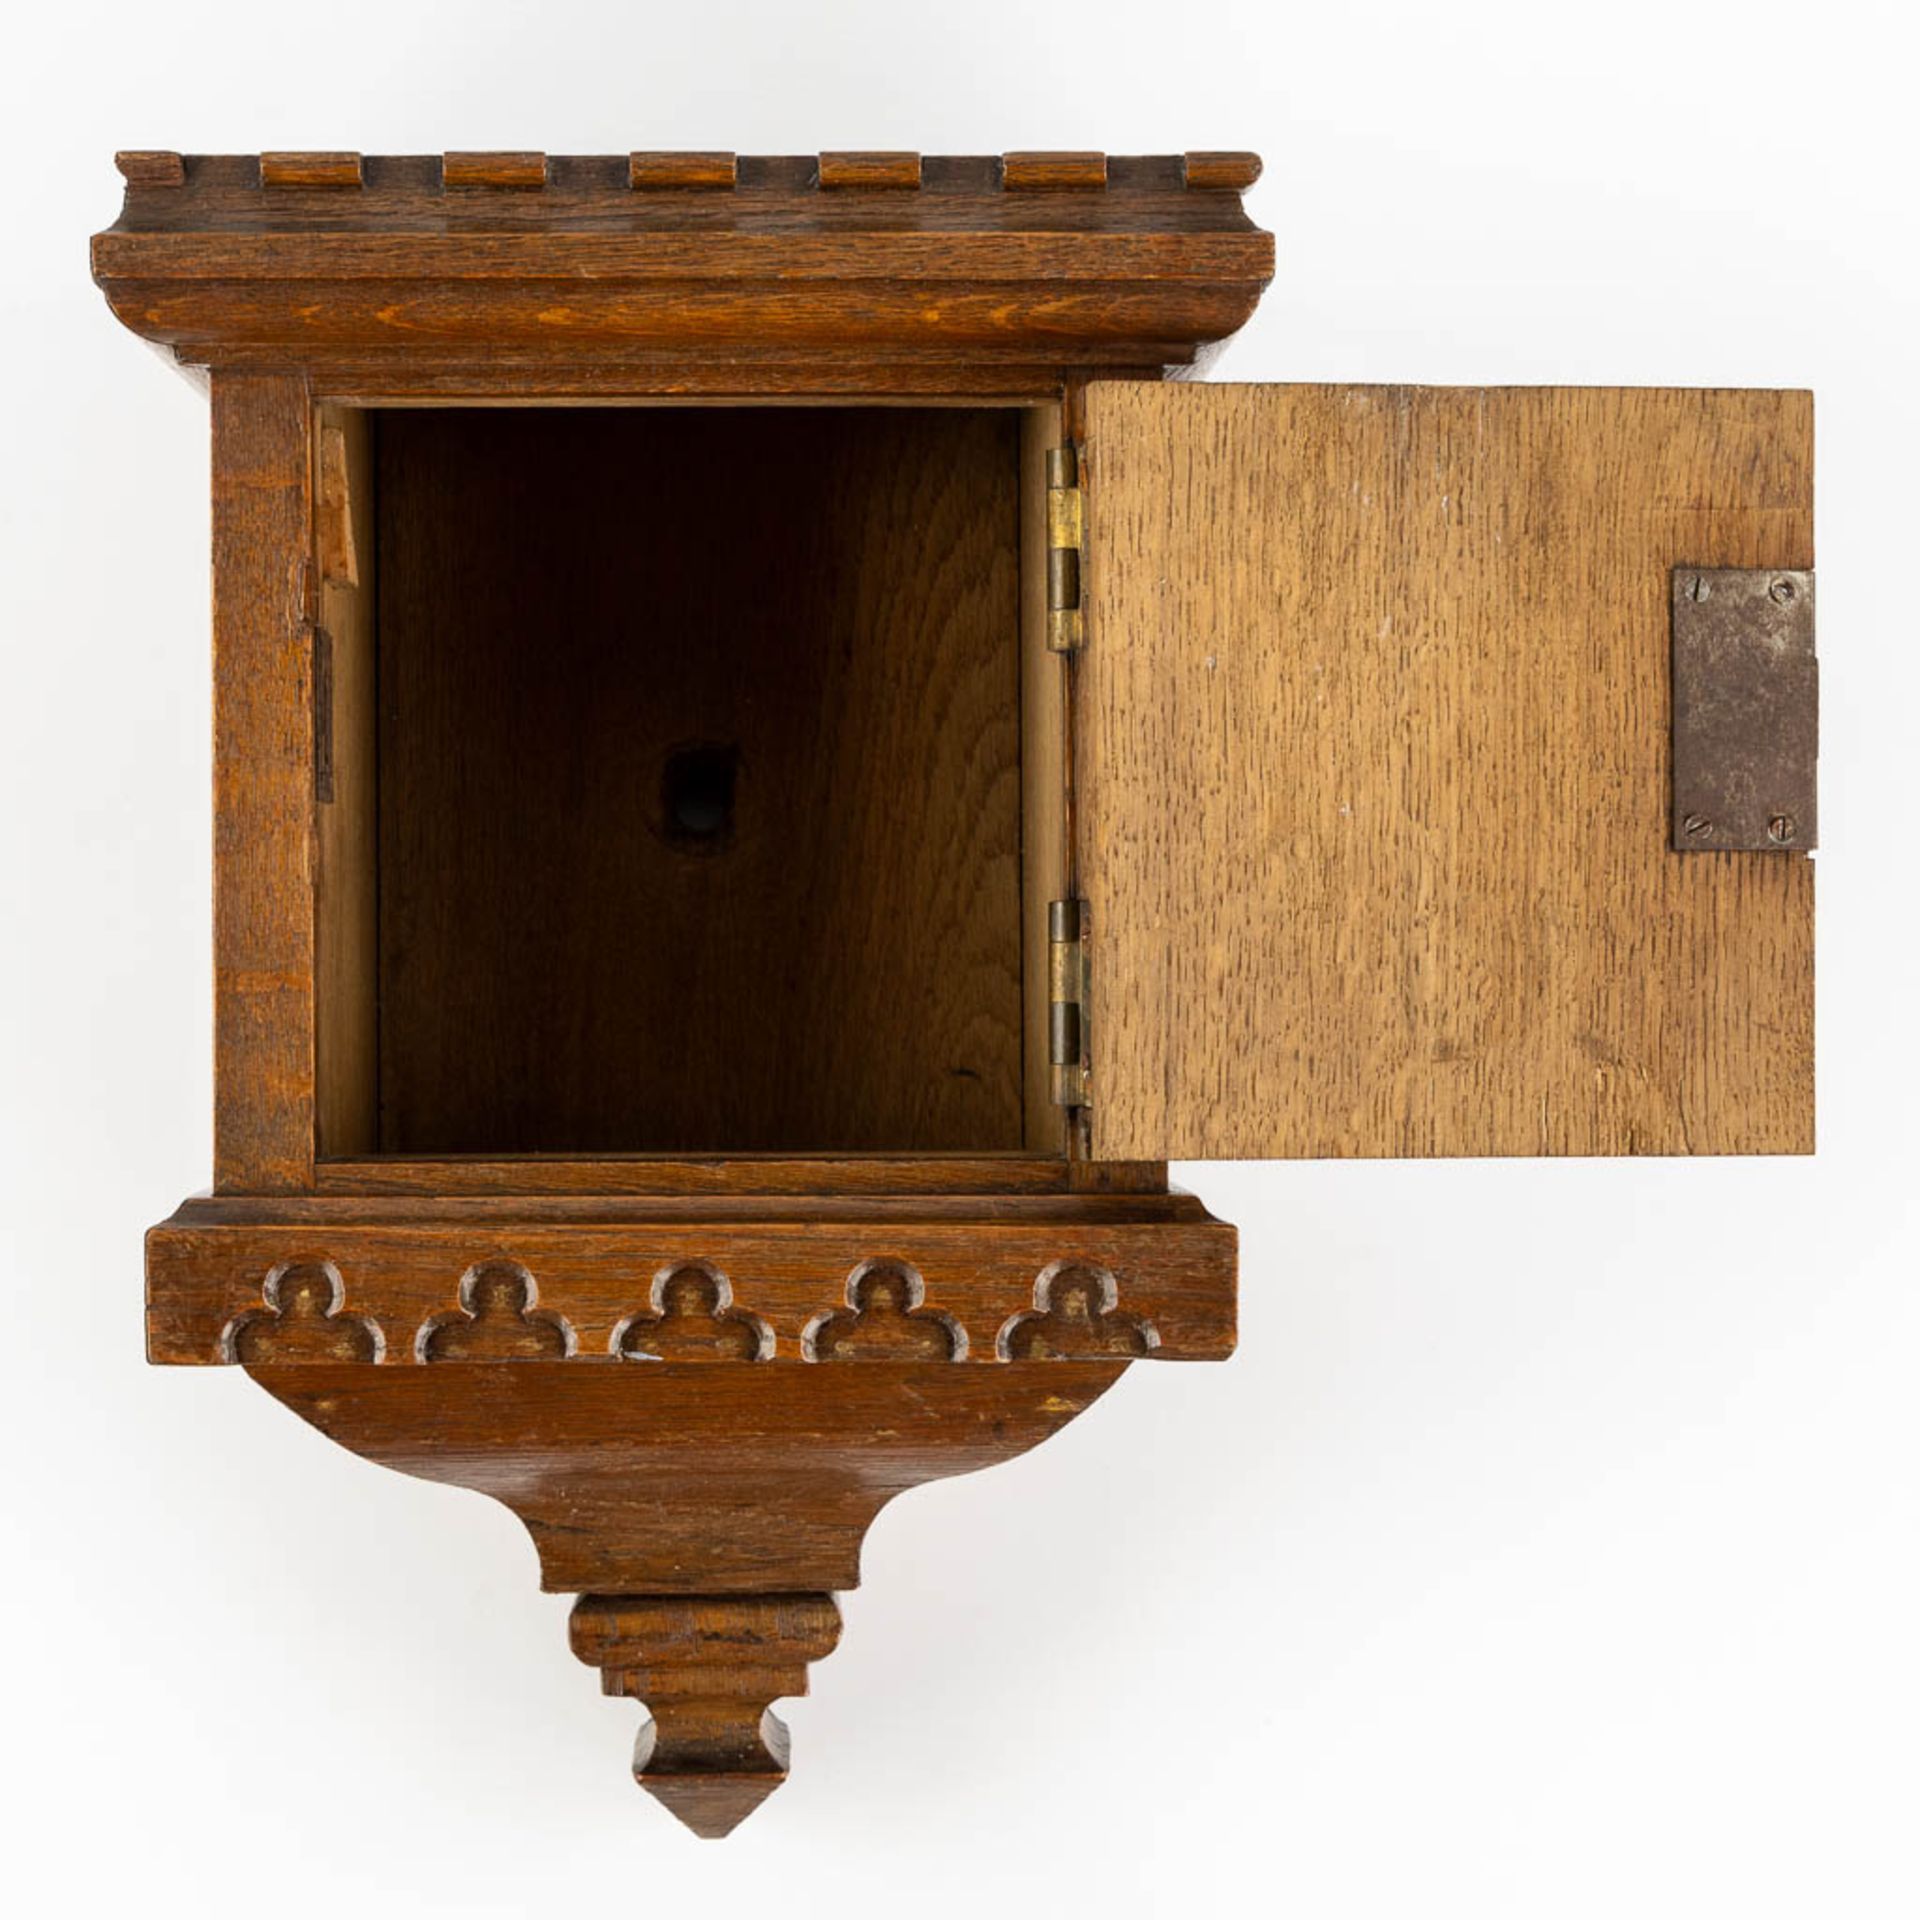 An Offertory or Poor box, sculptured oak, gothic revival. (L:20 x W:27 x H:42 cm) - Image 3 of 11